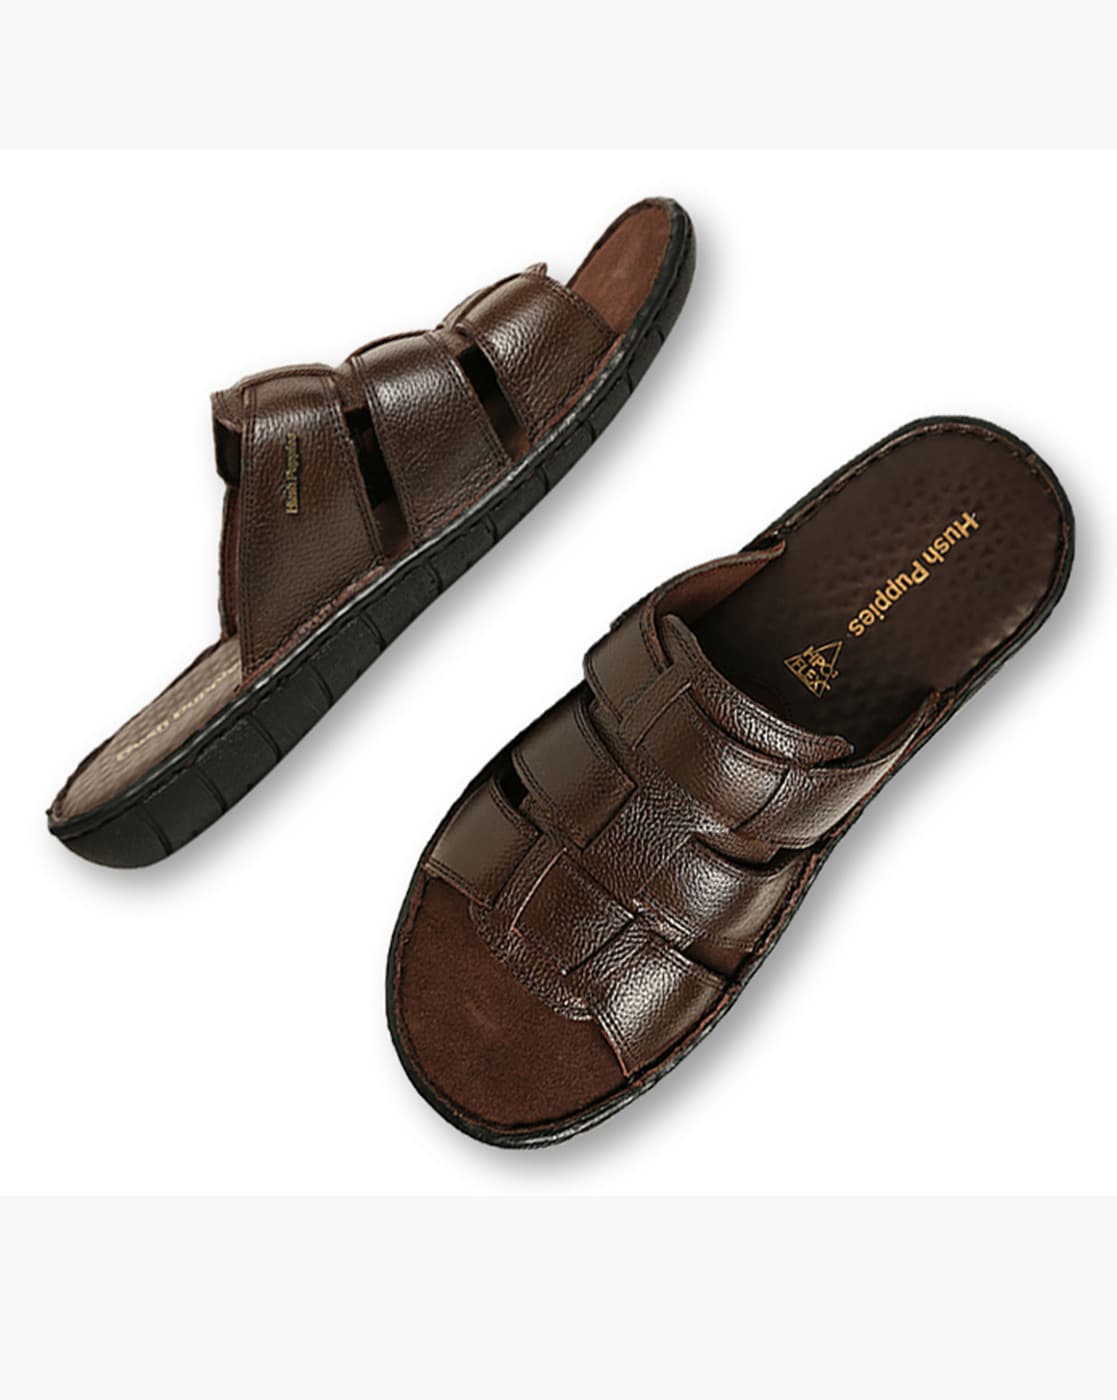 Hush Puppies Sandals Floaters - Buy Hush Puppies Sandals Floaters Online at  Best Prices In India | Flipkart.com